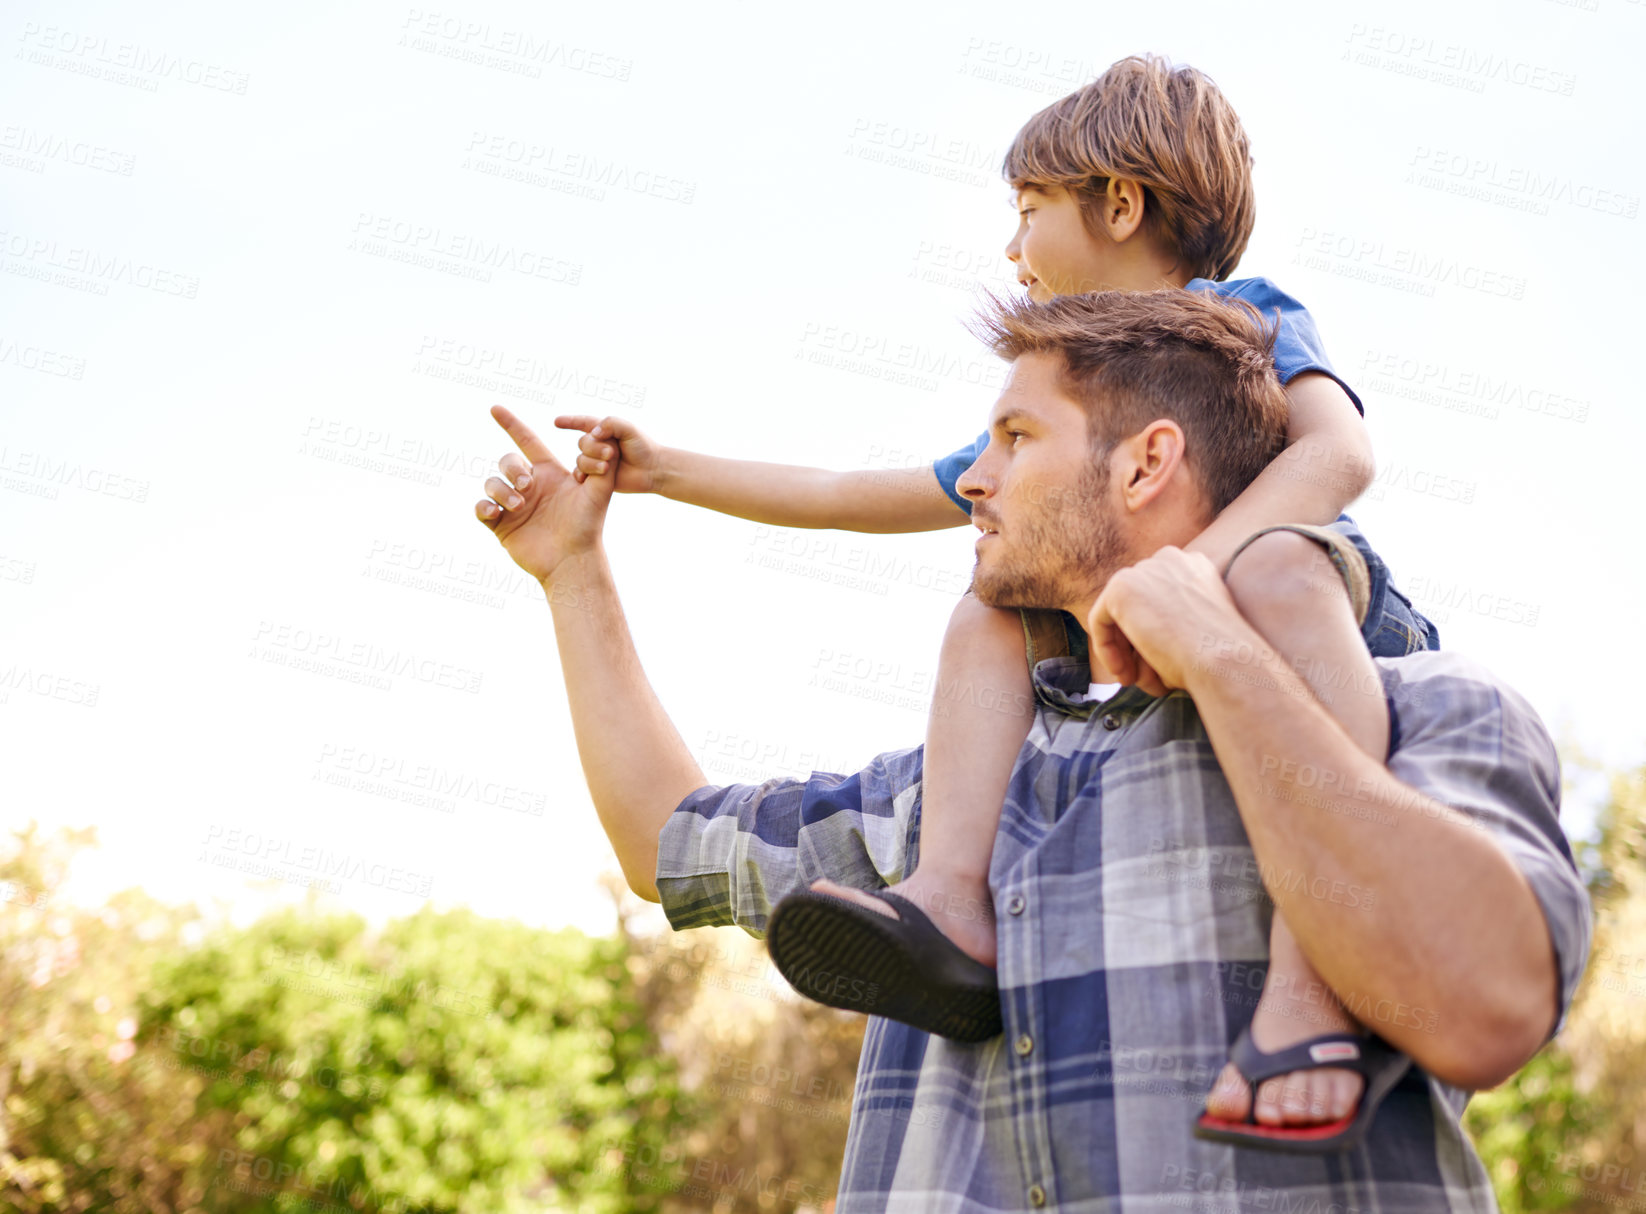 Buy stock photo Pointing, nature and child on father shoulders in outdoor park or field for playing together. Adventure, bonding and young dad carrying boy kid for fun and sightseeing in garden in Canada for summer.